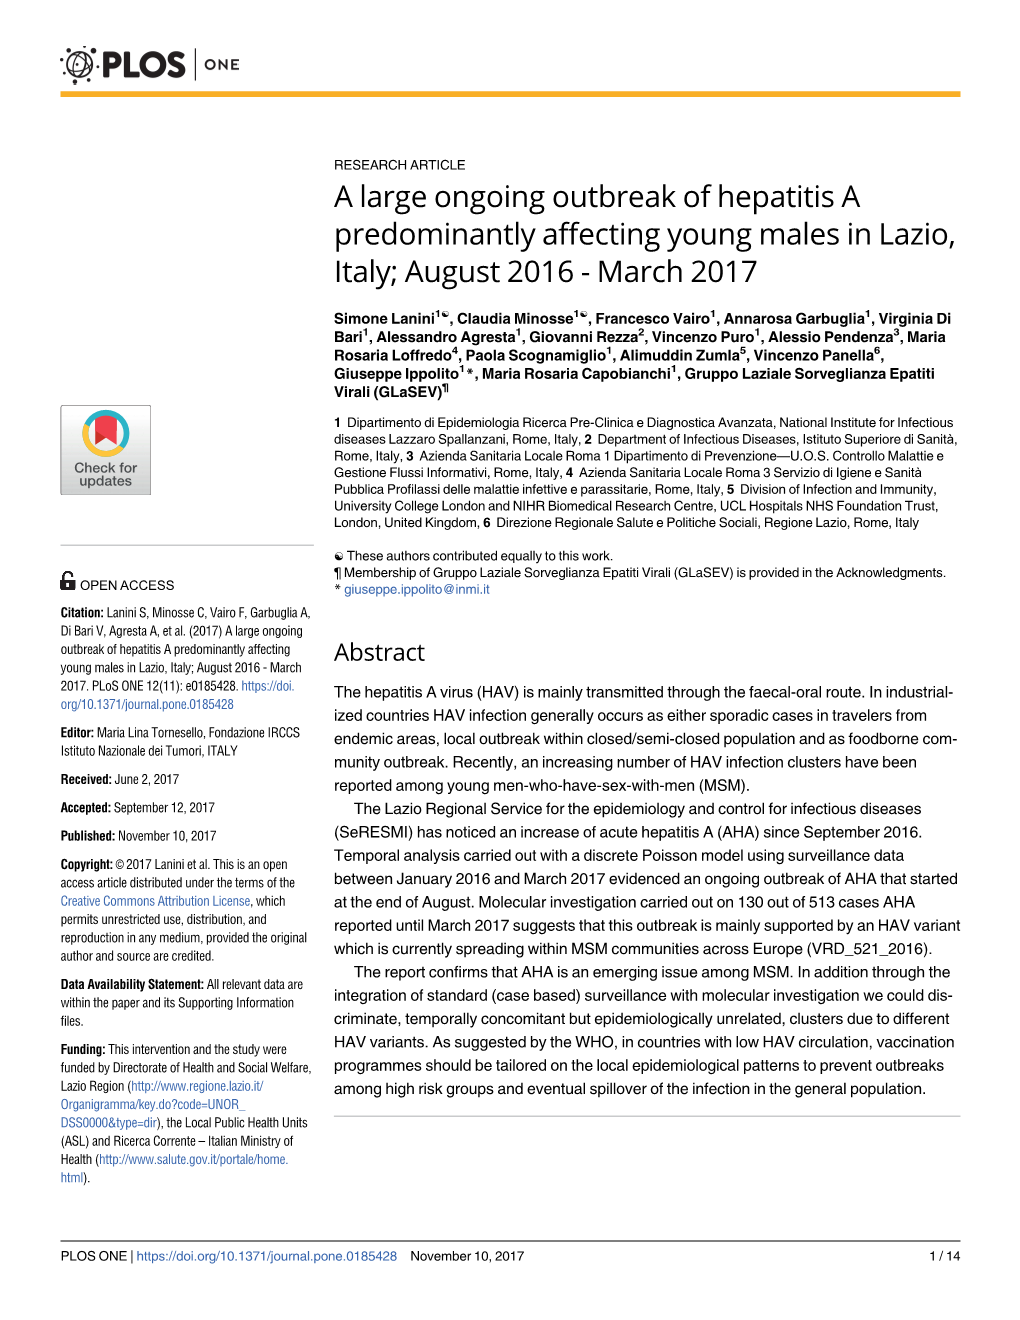 A Large Ongoing Outbreak of Hepatitis a Predominantly Affecting Young Males in Lazio, Italy; August 2016 - March 2017